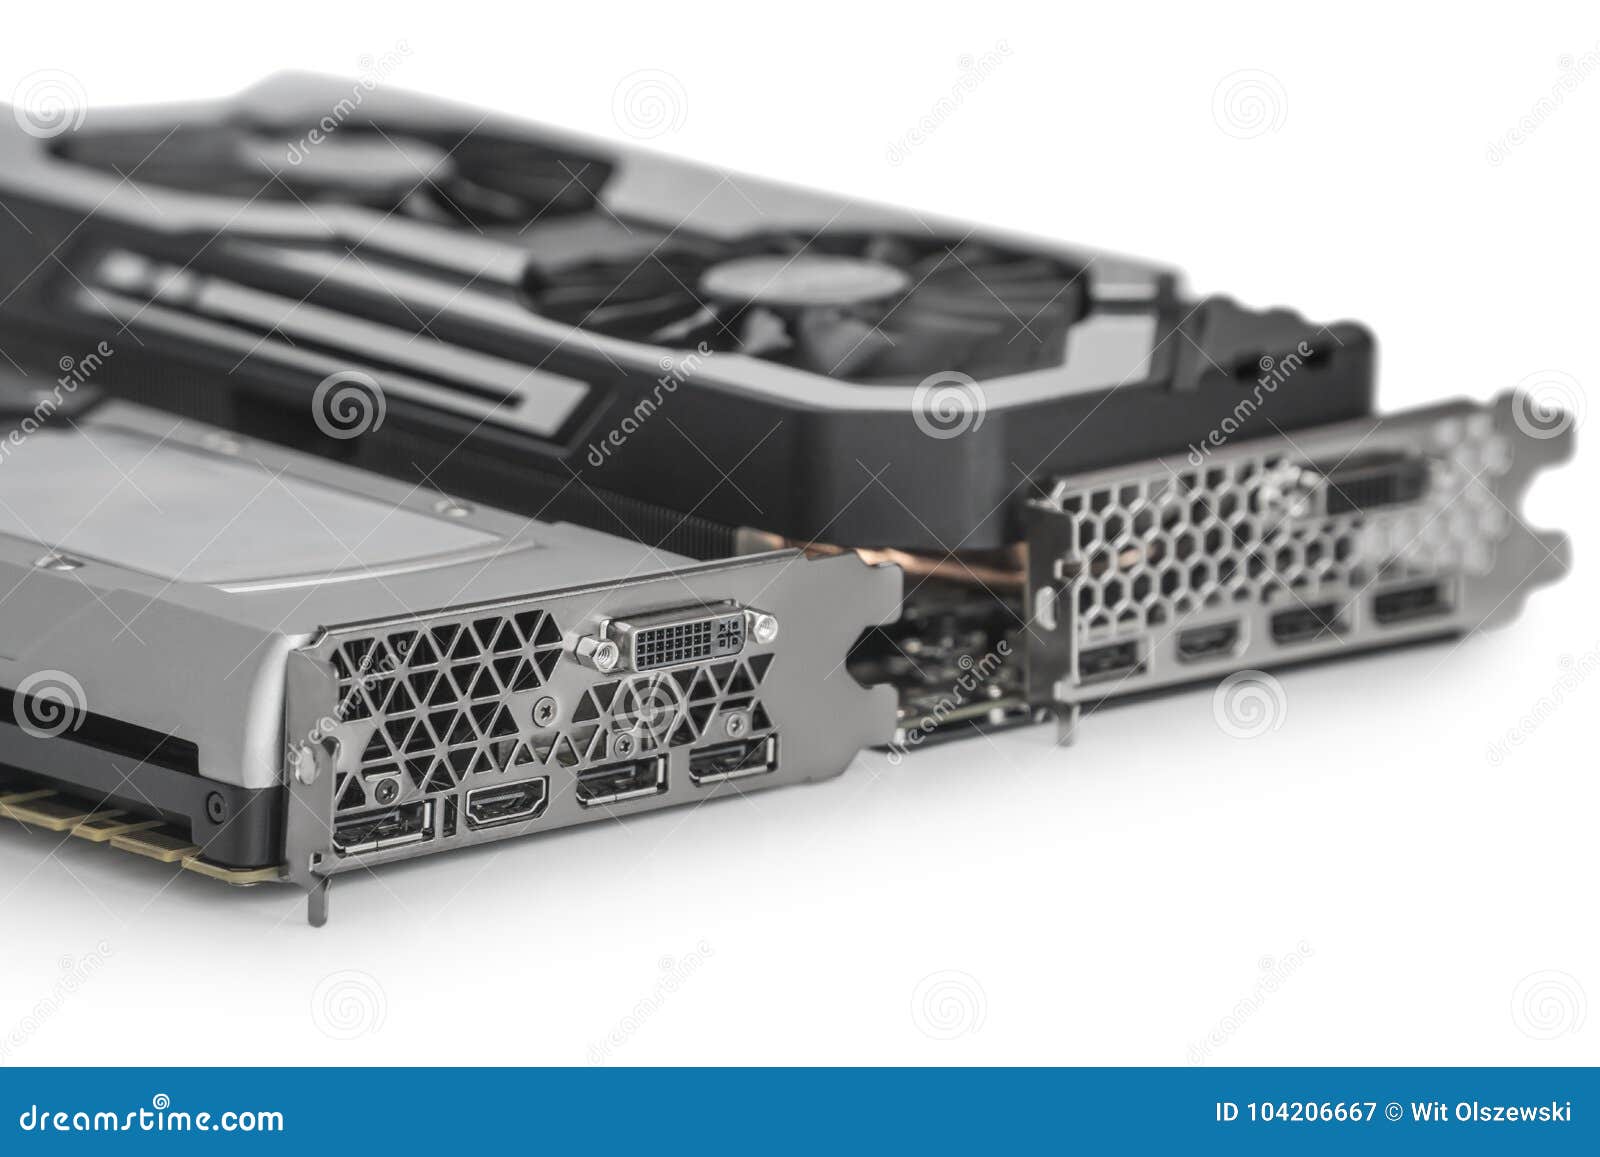 two video graphics cards with powerful gpu  on white background